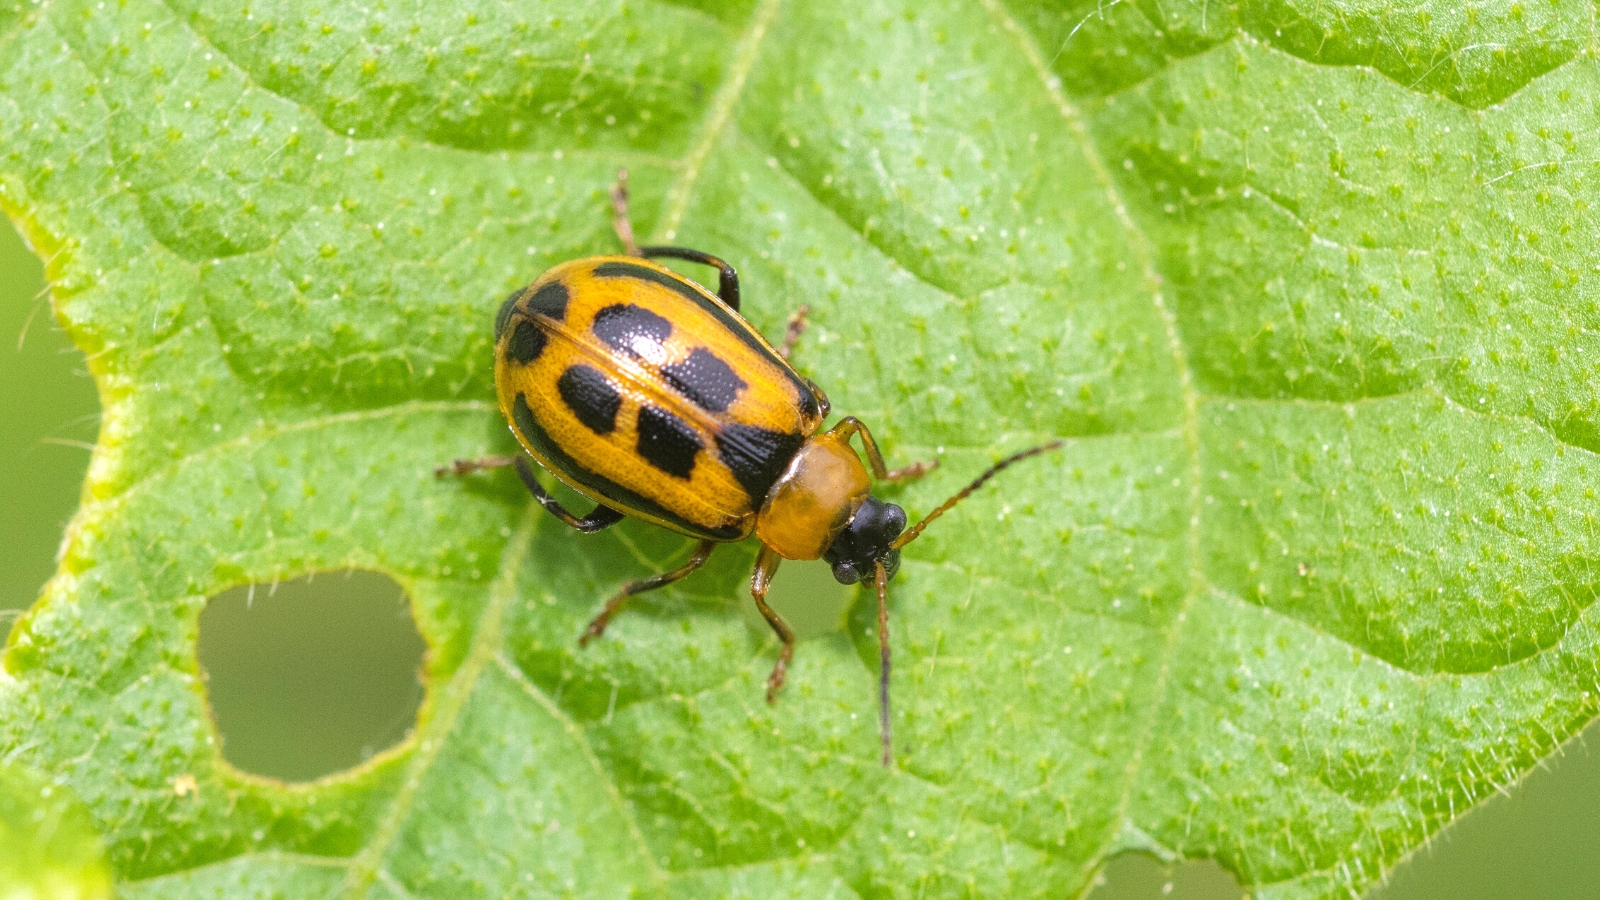 Bean leaf beetle is crawling on a green leaf with a spot next to its body.